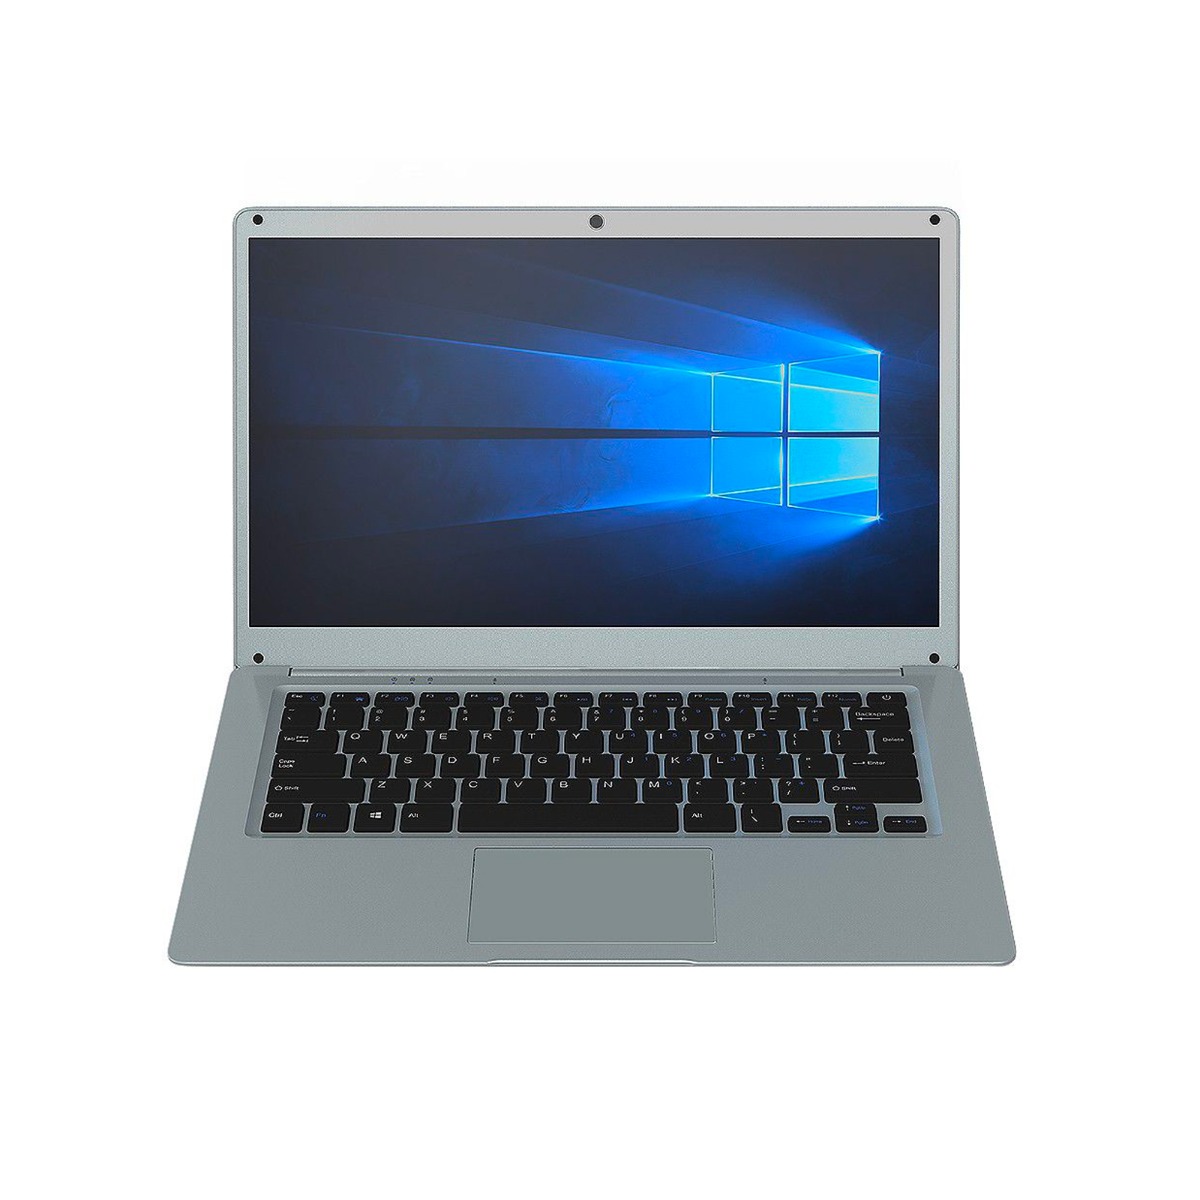 Proline-V146BB-Proline-V146BB-V146BB-Laptops | LaptopSA.co.za a division of the notebook company 